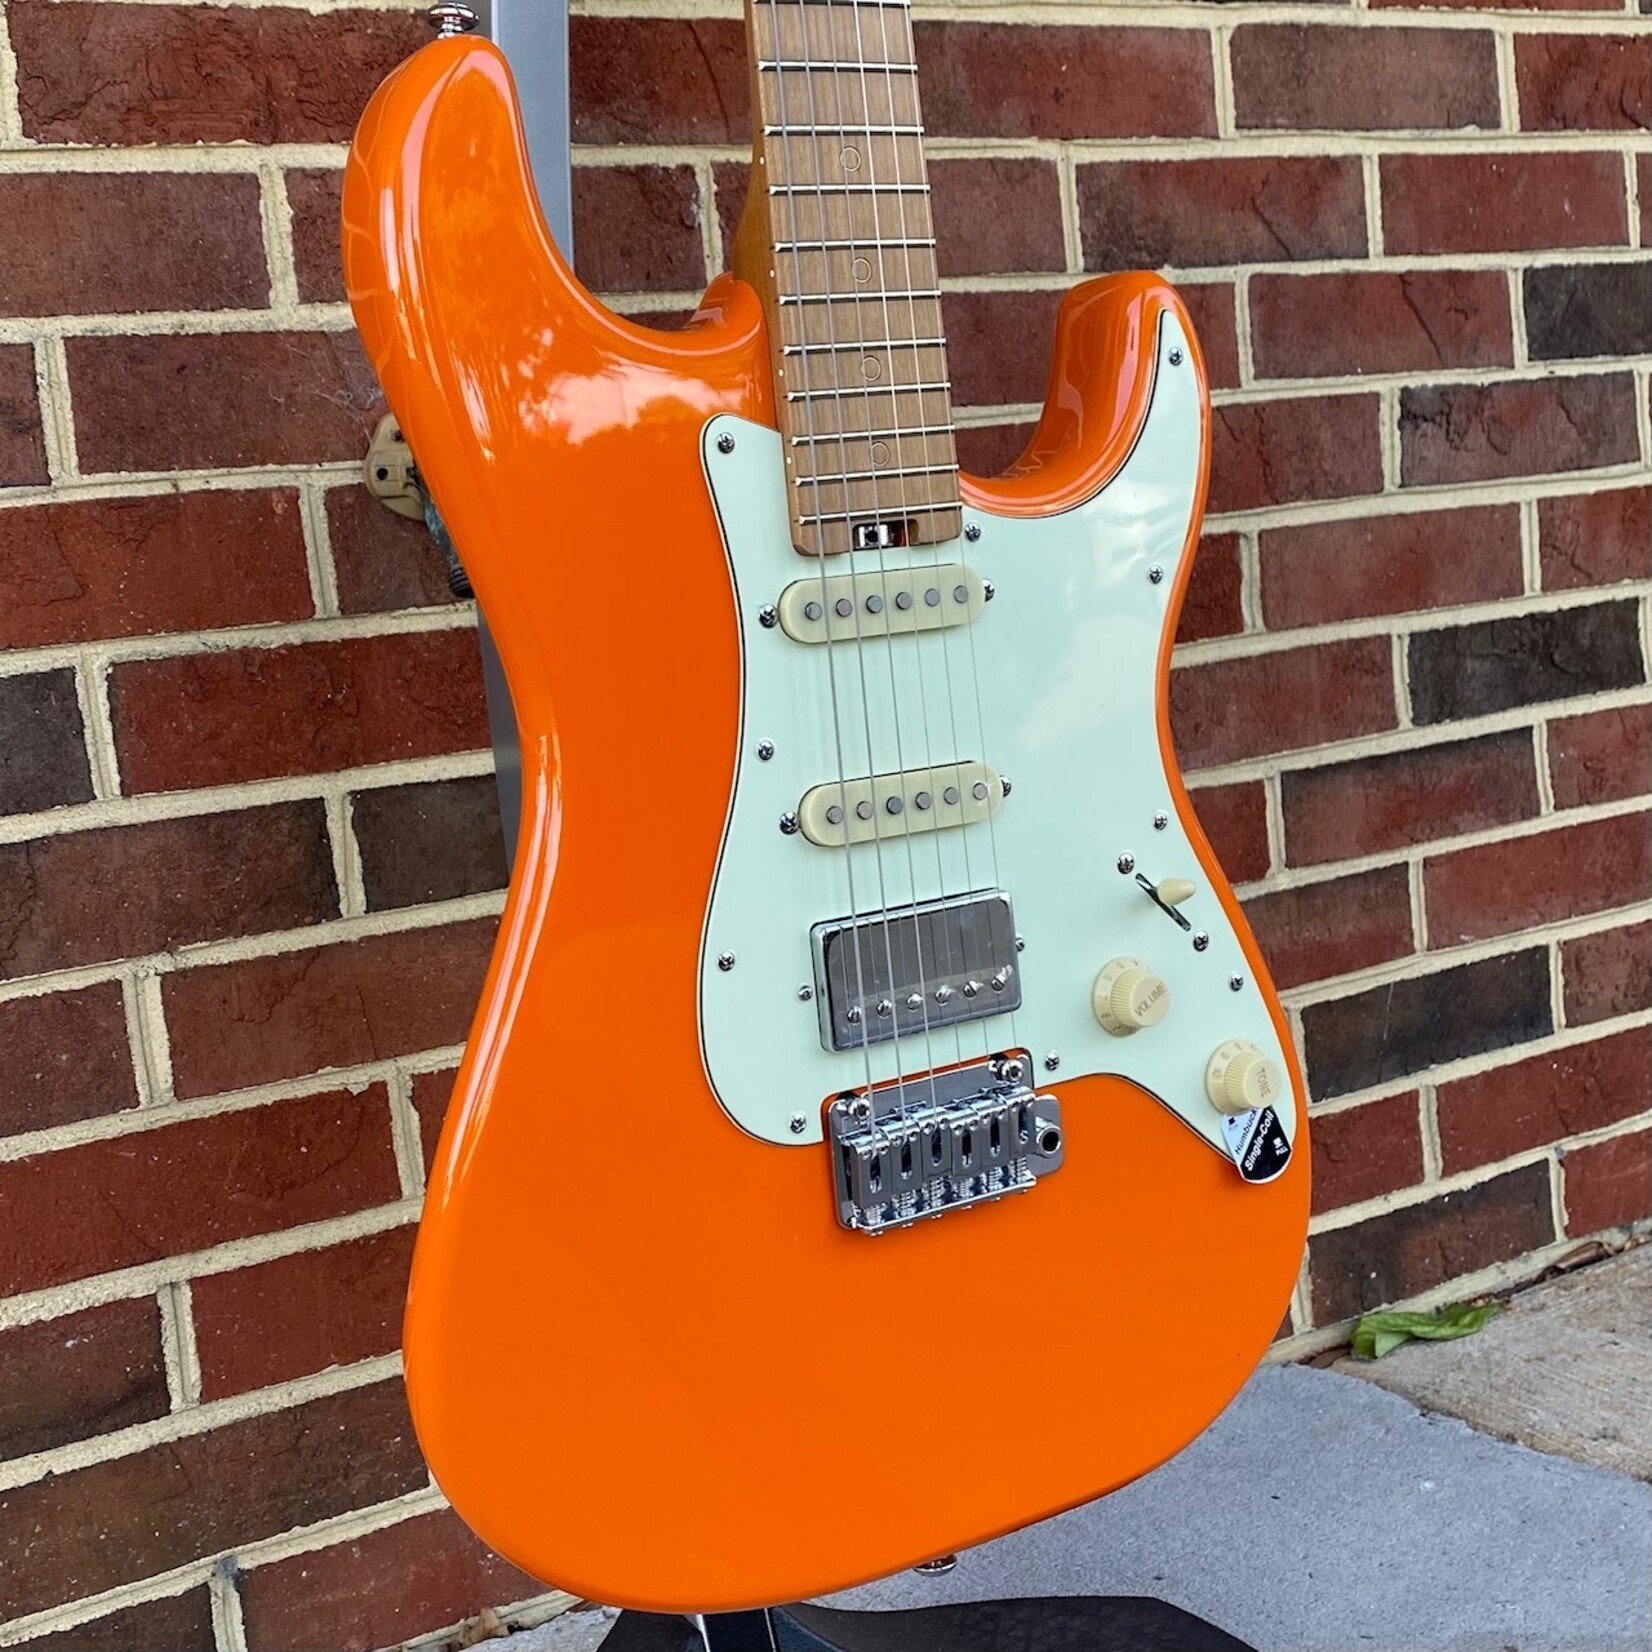 Schecter Guitar Research Schecter Nick Johnston Traditional HSS, Atomic Orange, Roasted Maple Neck, Ebony Fretboard, Locking Tuners